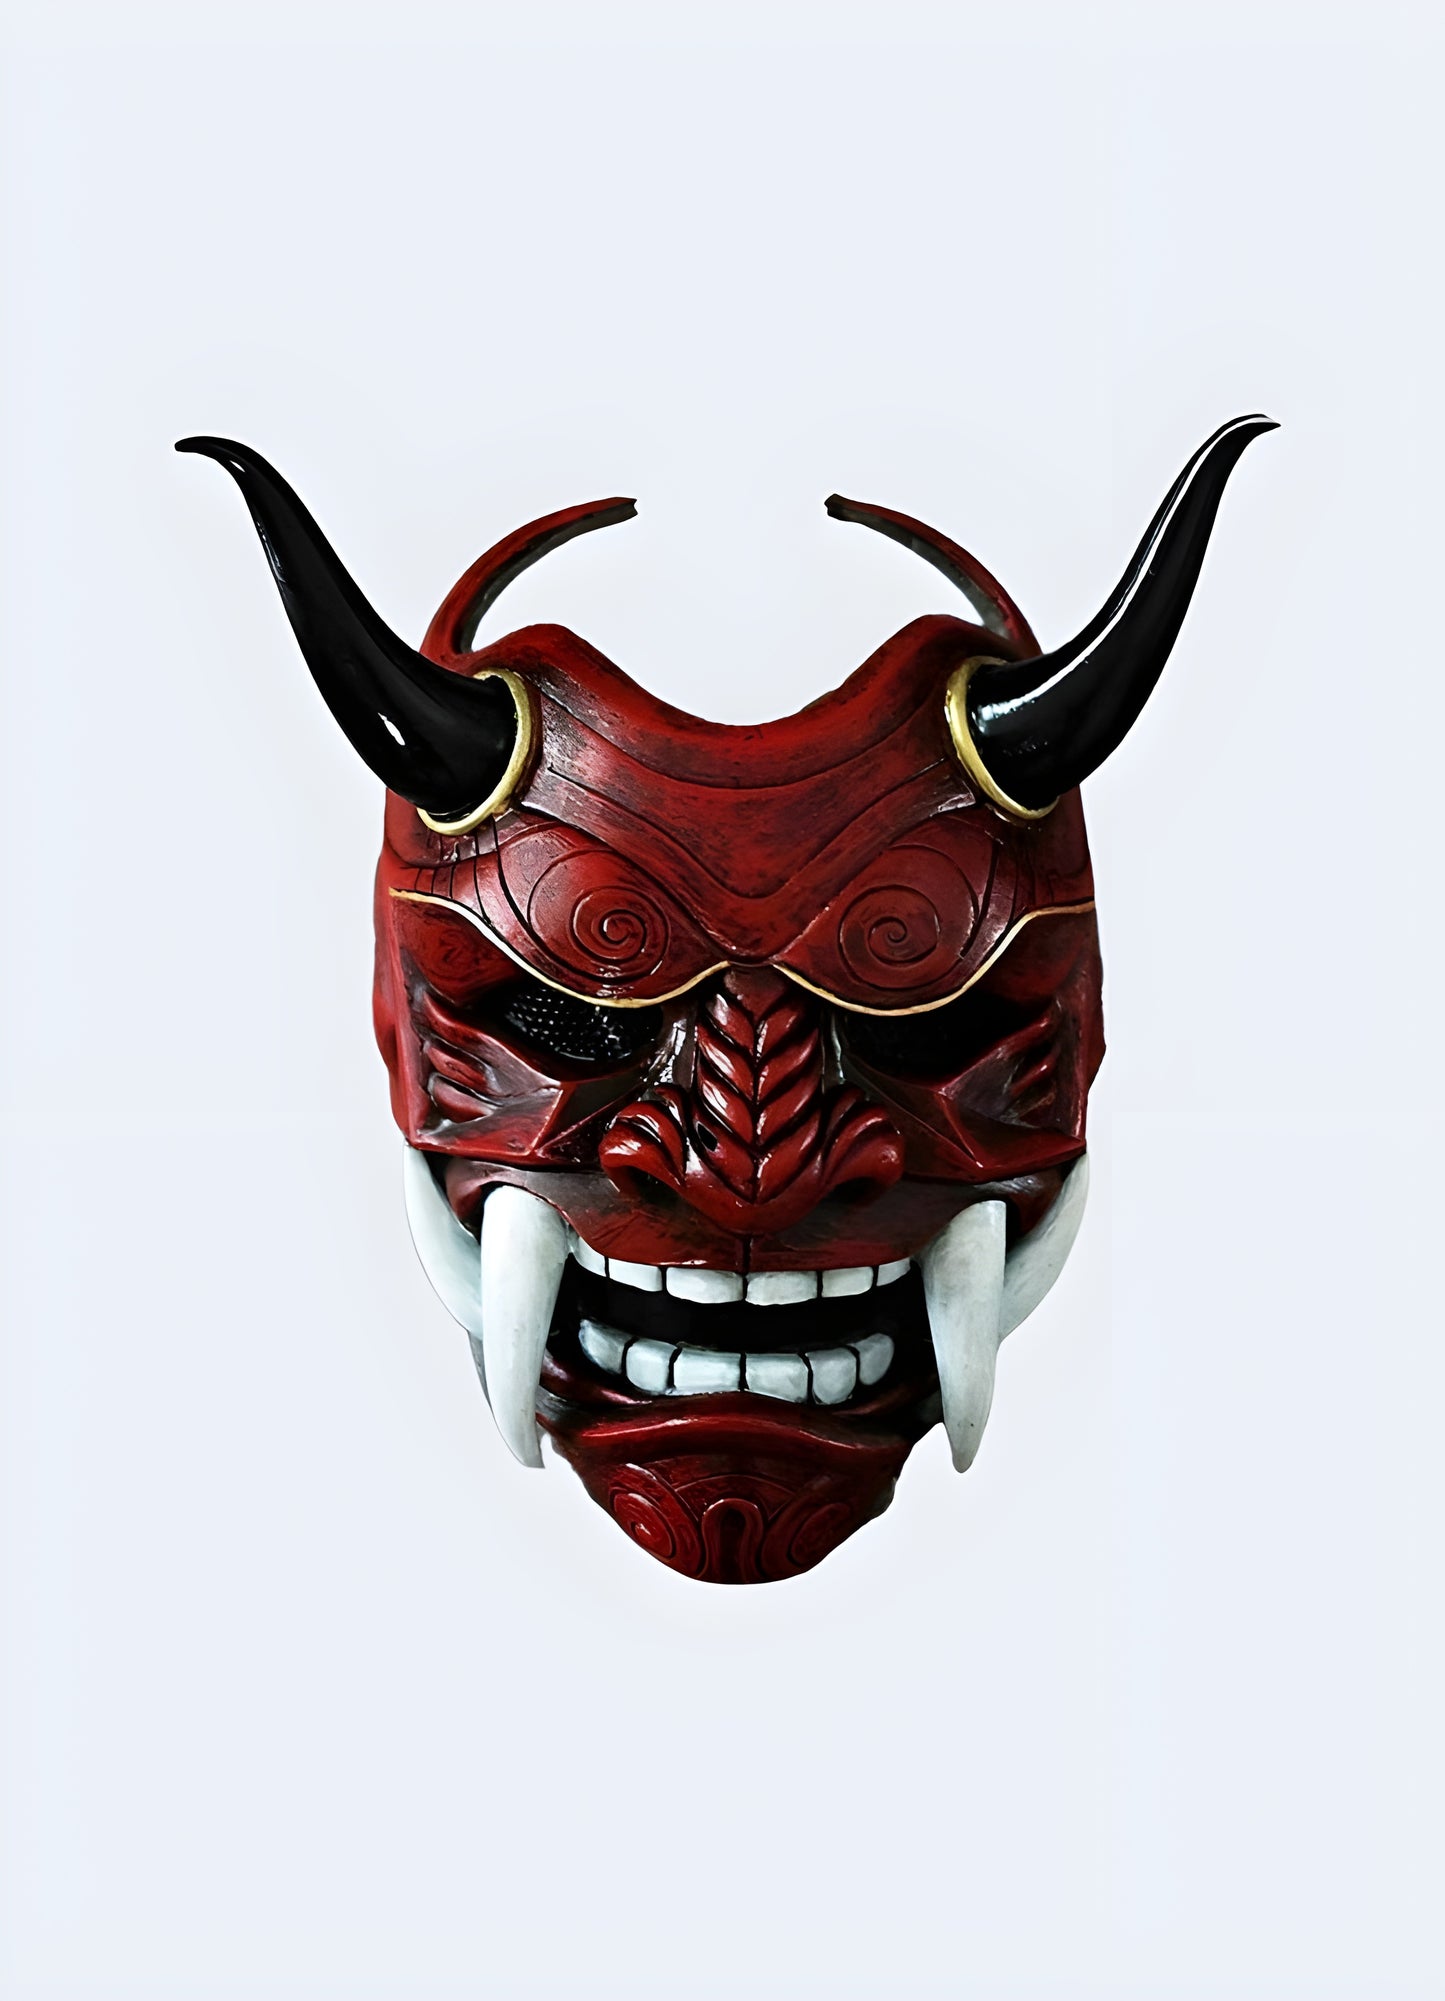 Crafted meticulously to evoke fear and respect, the Oni Demon Mask pays homage to the formidable warriors of old.